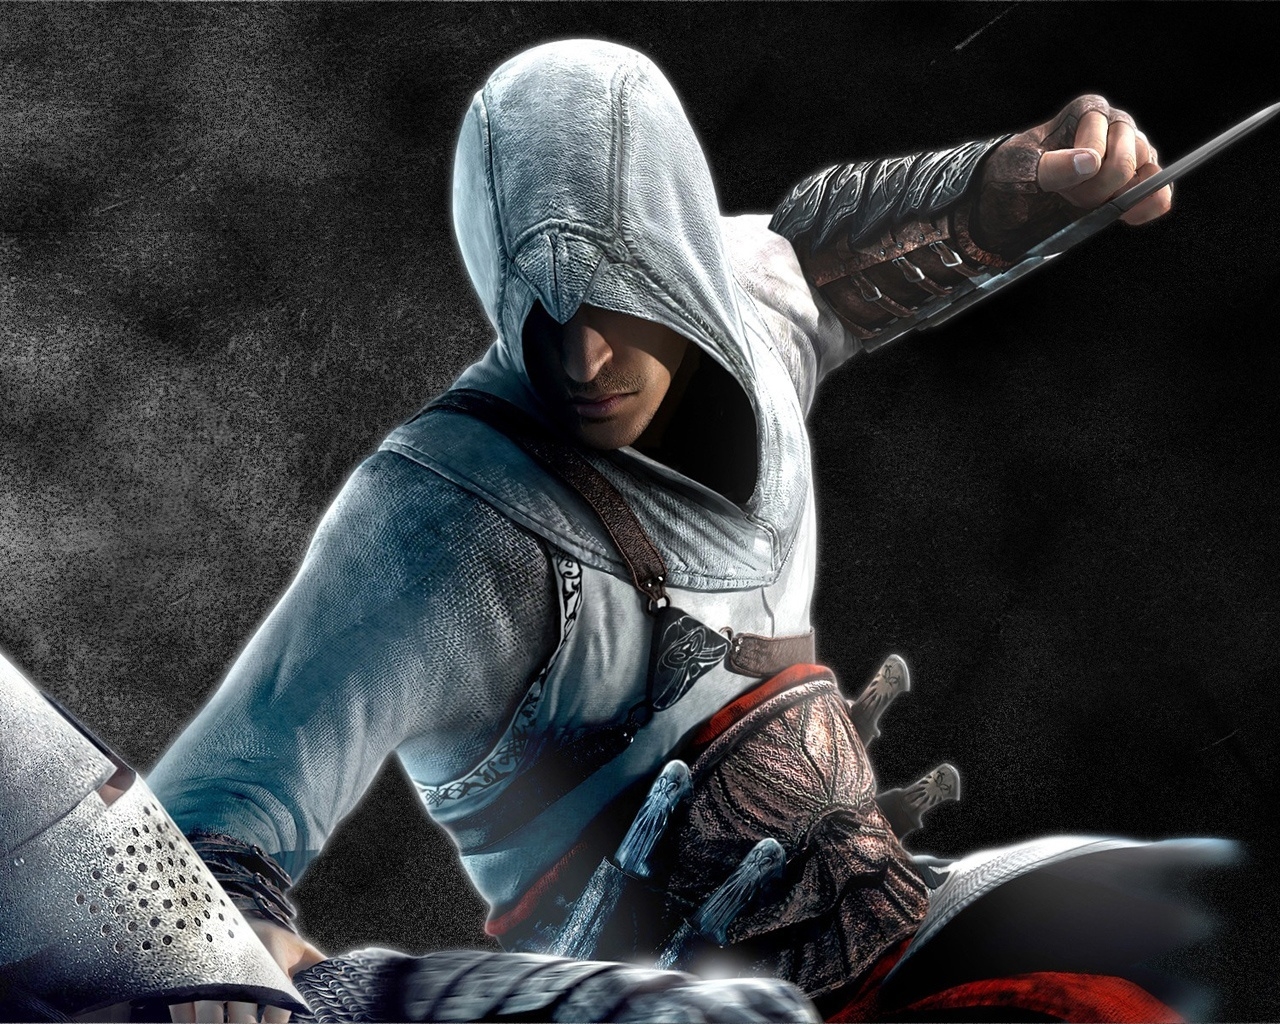 Assassin Creed for 1280 x 1024 resolution